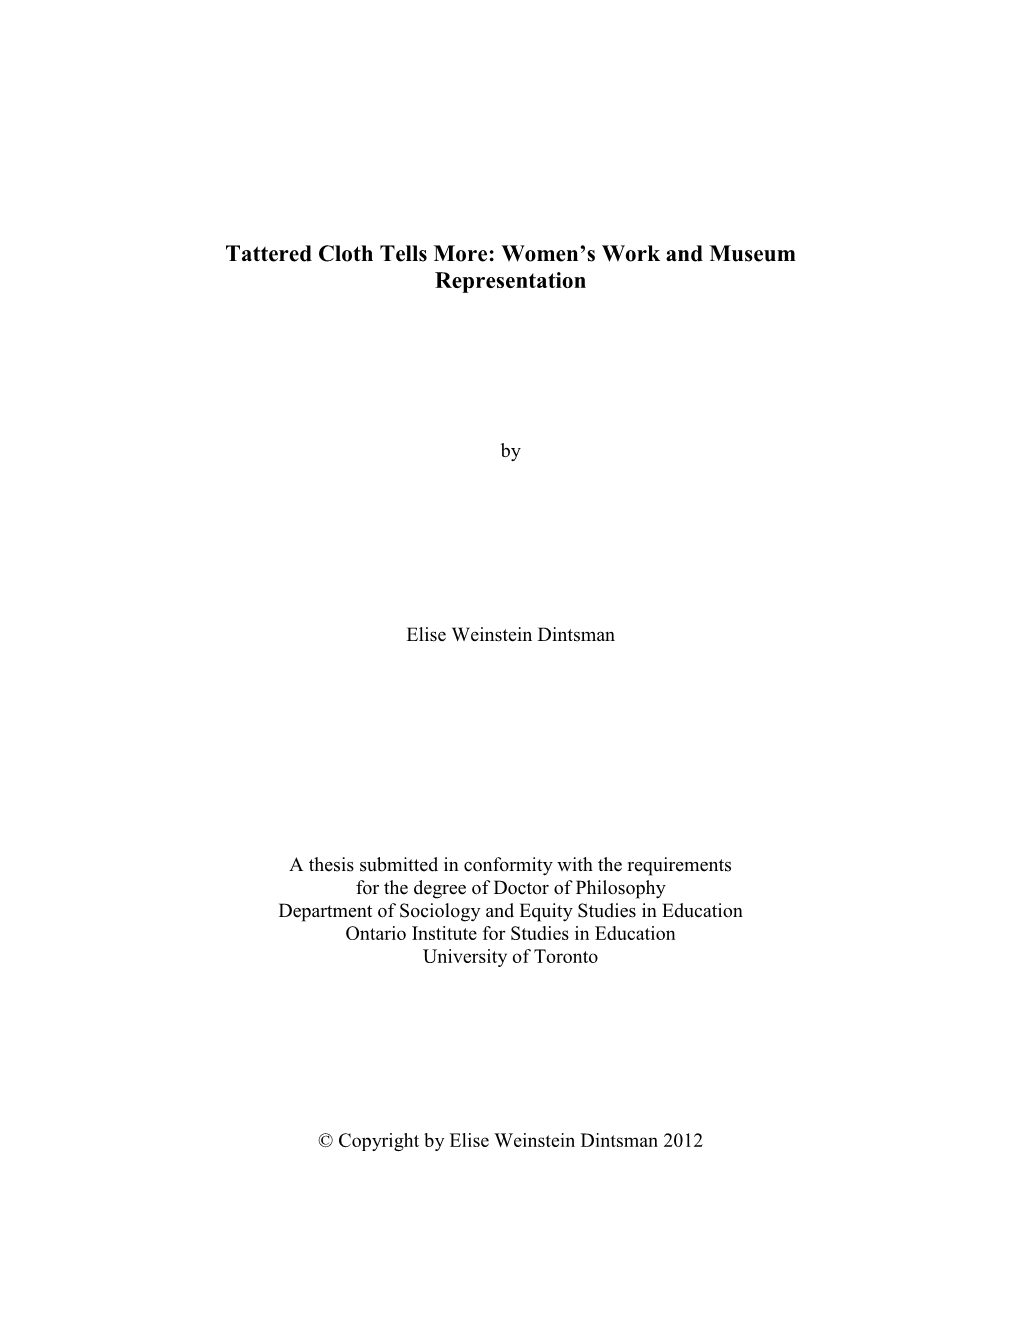 Theoretical Framework: on Culture and Work 8